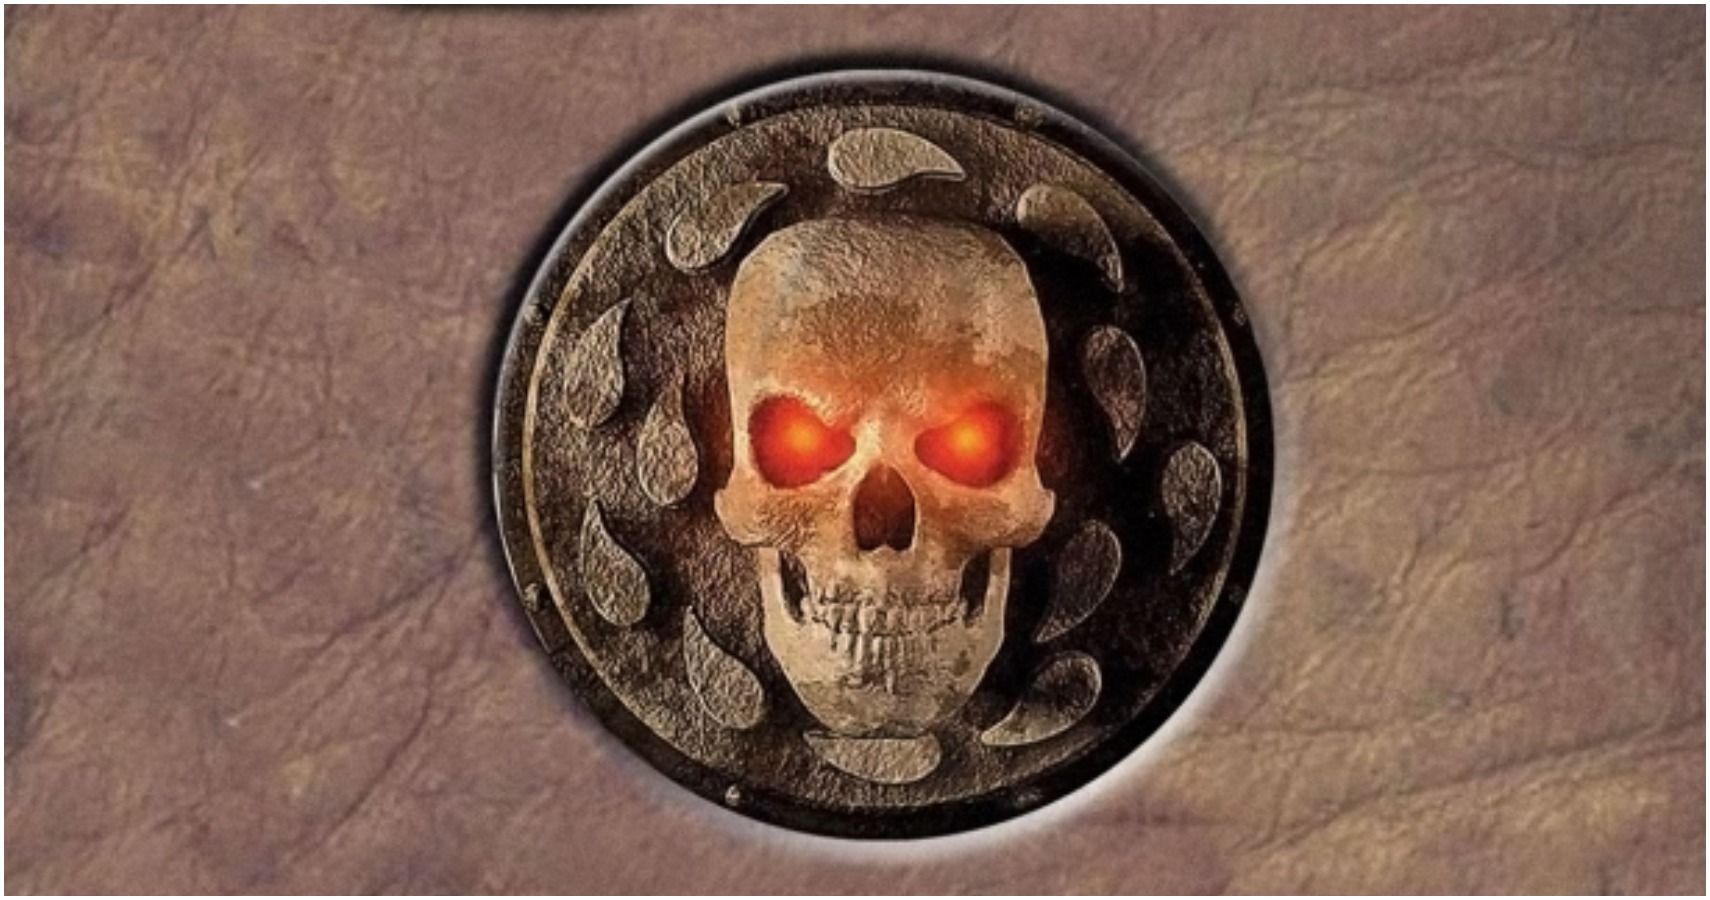 Baldur's Gate 3 devs confirm crossplay plans but advise fans not to hold  their breath - Dexerto